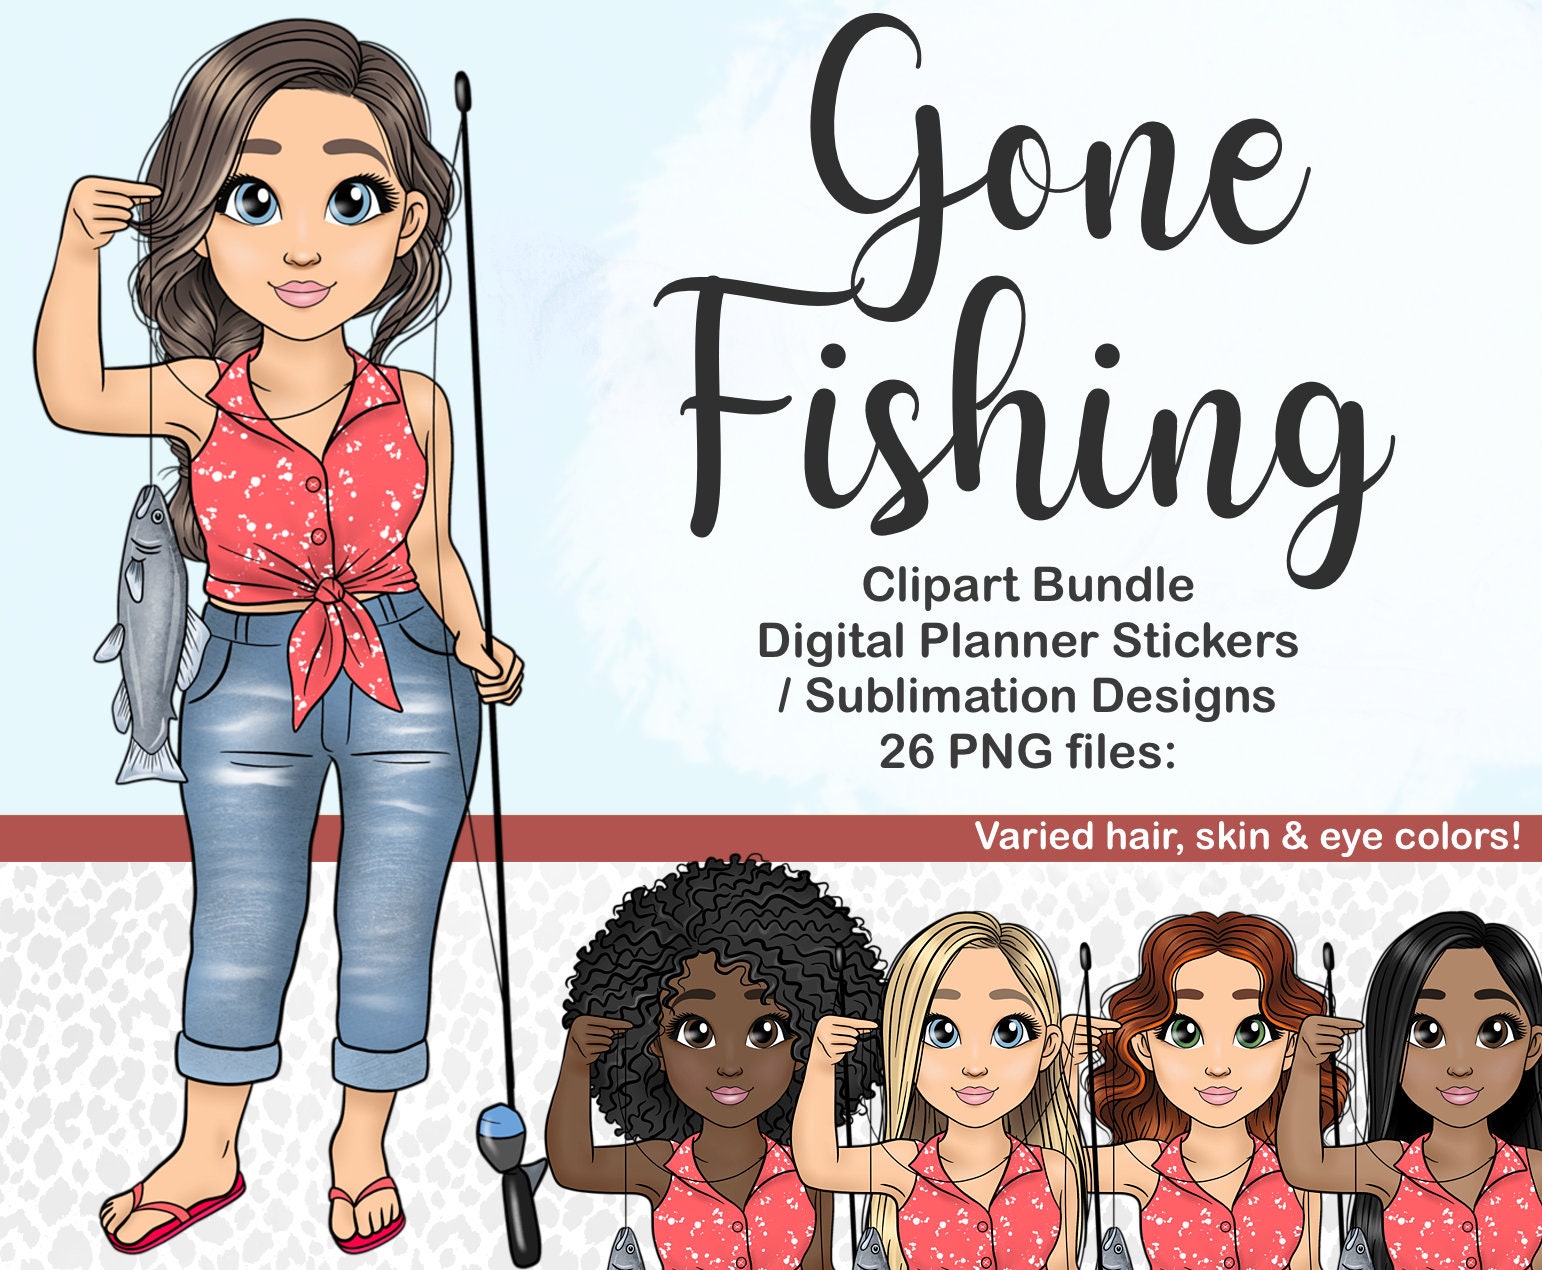 Gone Fishing Girl Clipart, Lady Fisherman PNG, Summer Lake Activities  Digital Planner Sticker, River Vacation Files, Beach Fun Childrens Art 